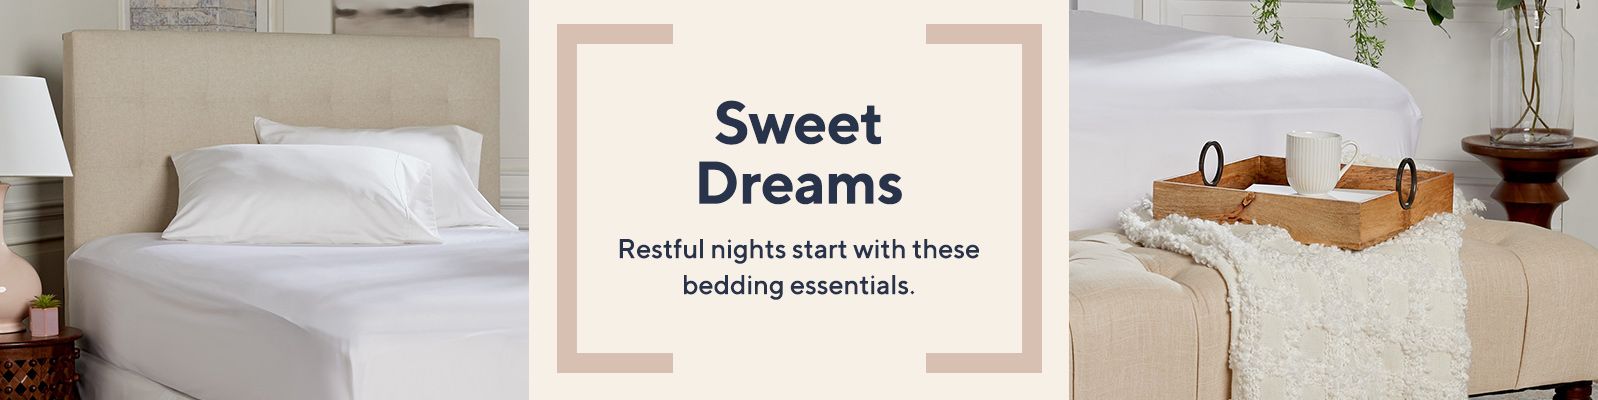 Sweet Dreams - Restful nights start with these bedding essentials. 